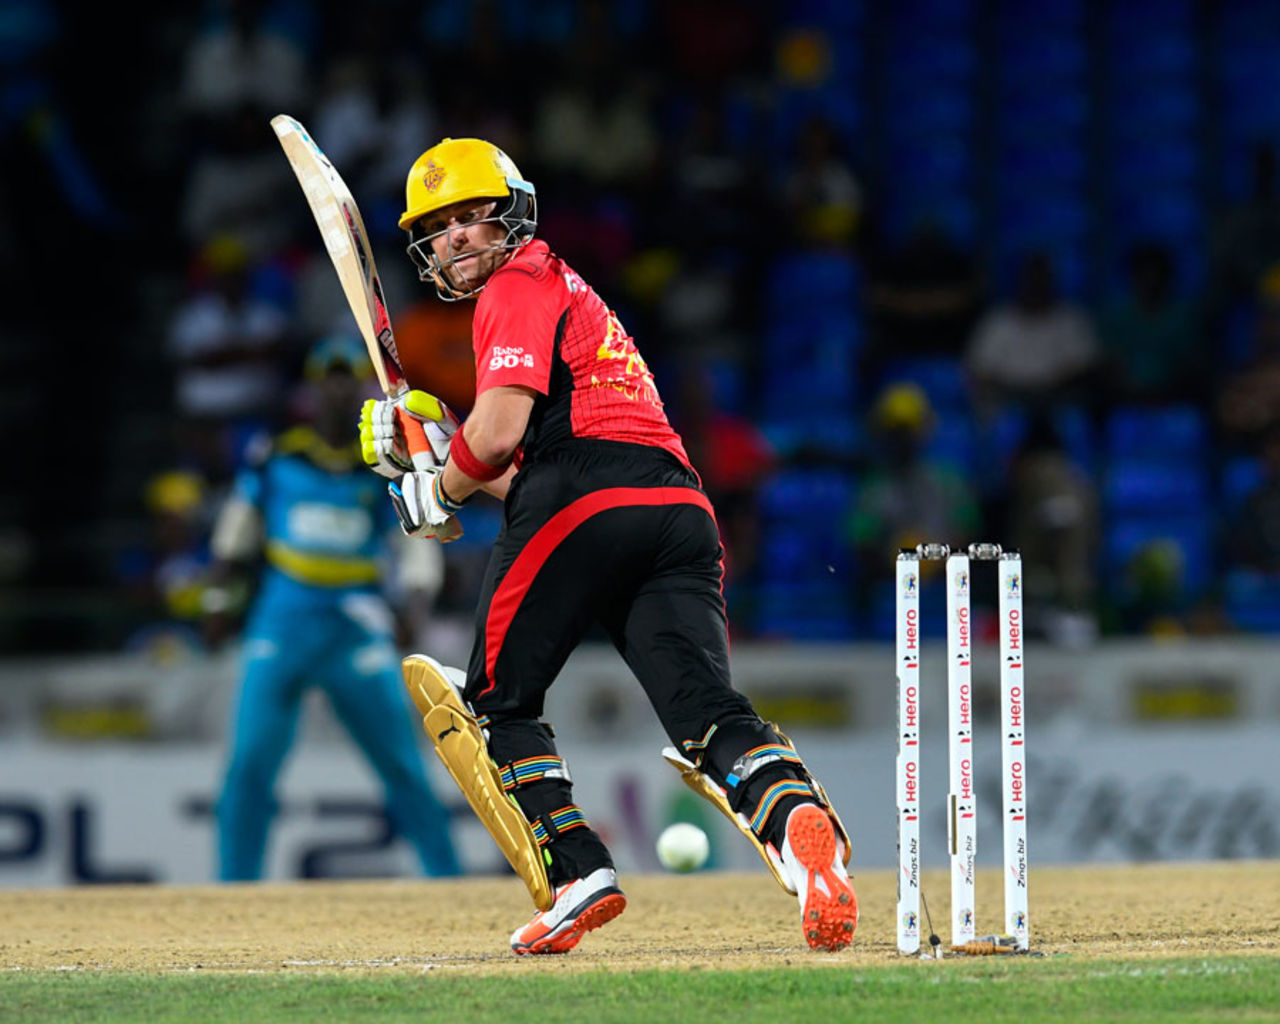 Brendon McCullum's unbeaten 49 off 41 steered Knight Riders home, St Lucia Zouks v Trinbago Knight Riders, CPL 2016, eliminator, St Kitts, August 4, 2016